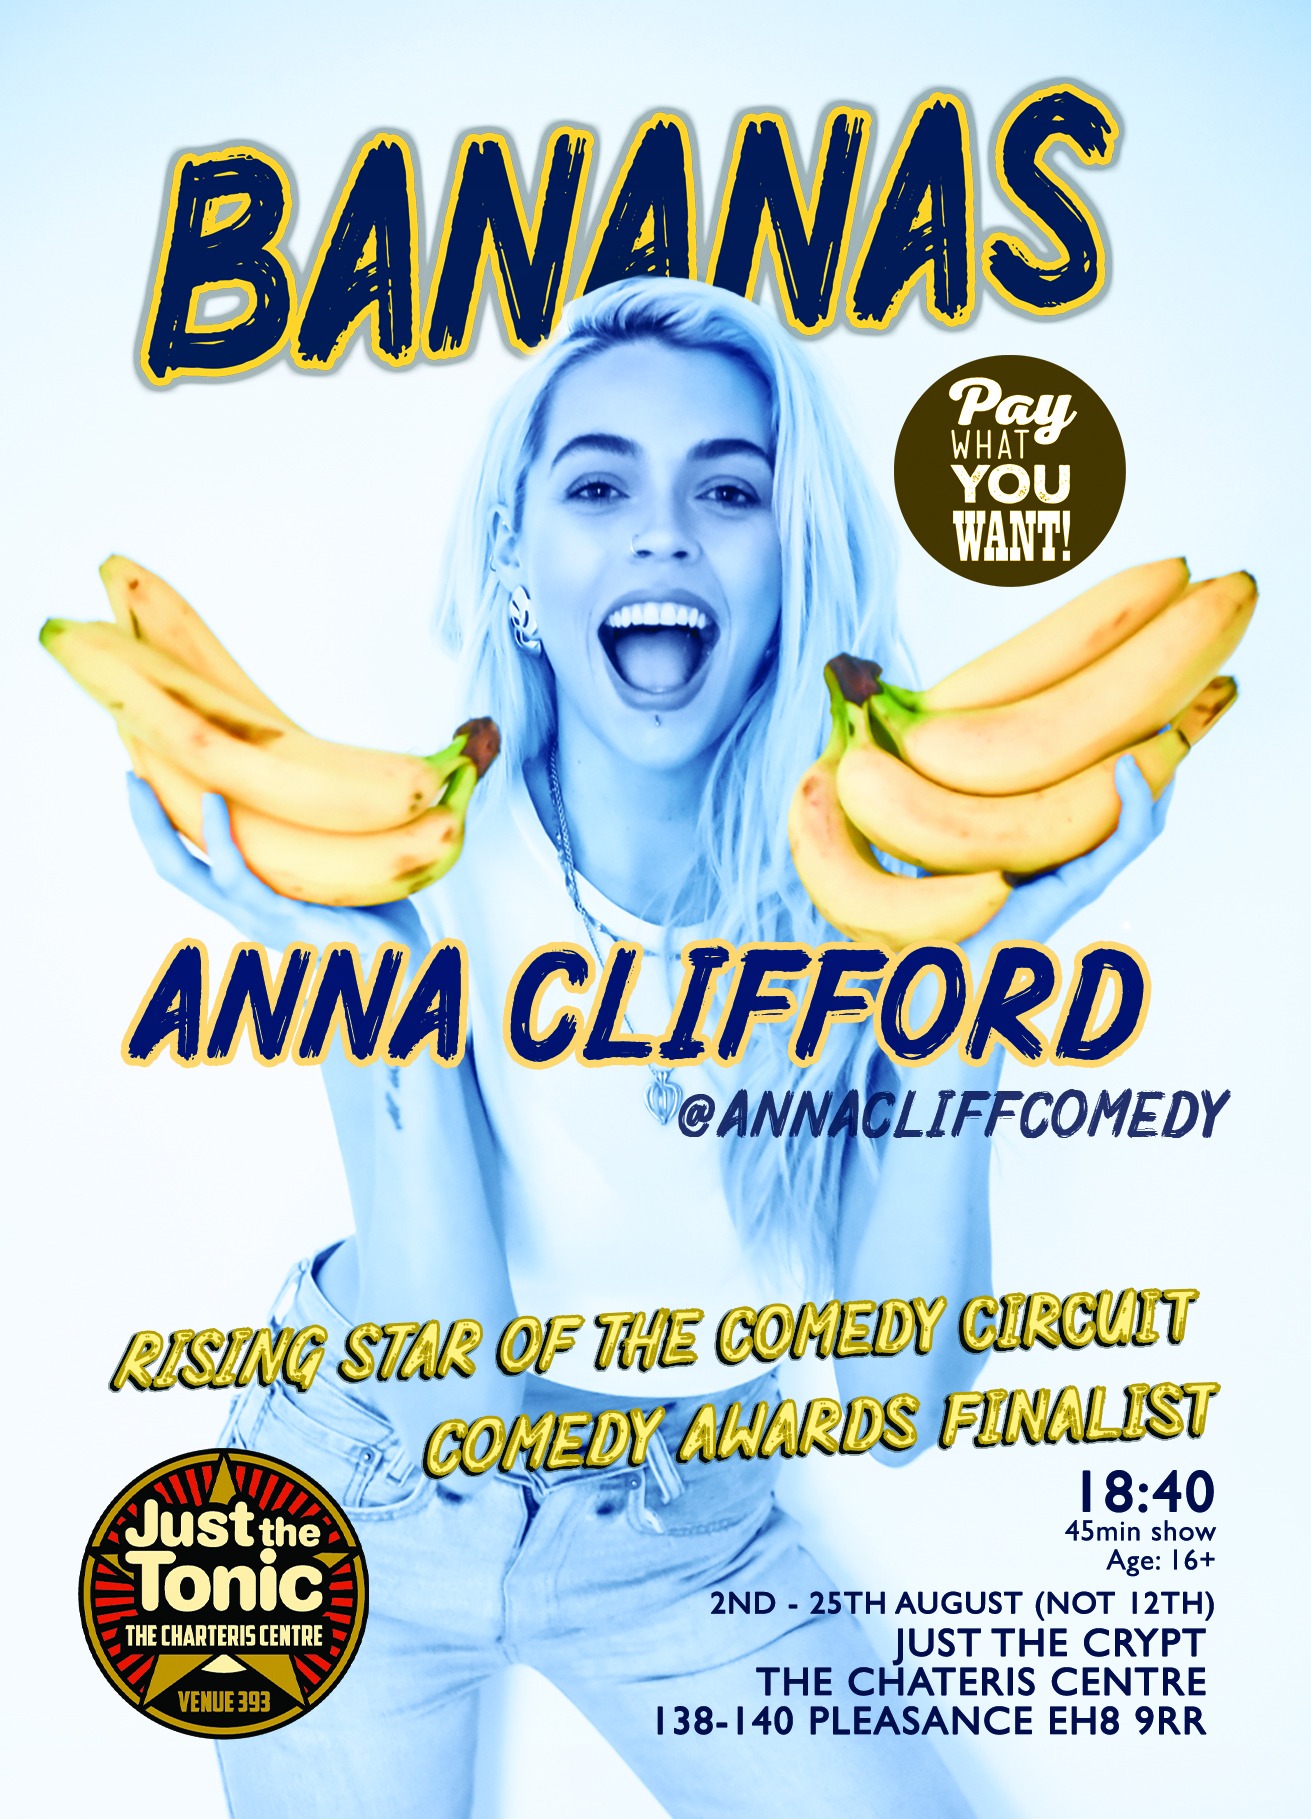 The poster for Bananas